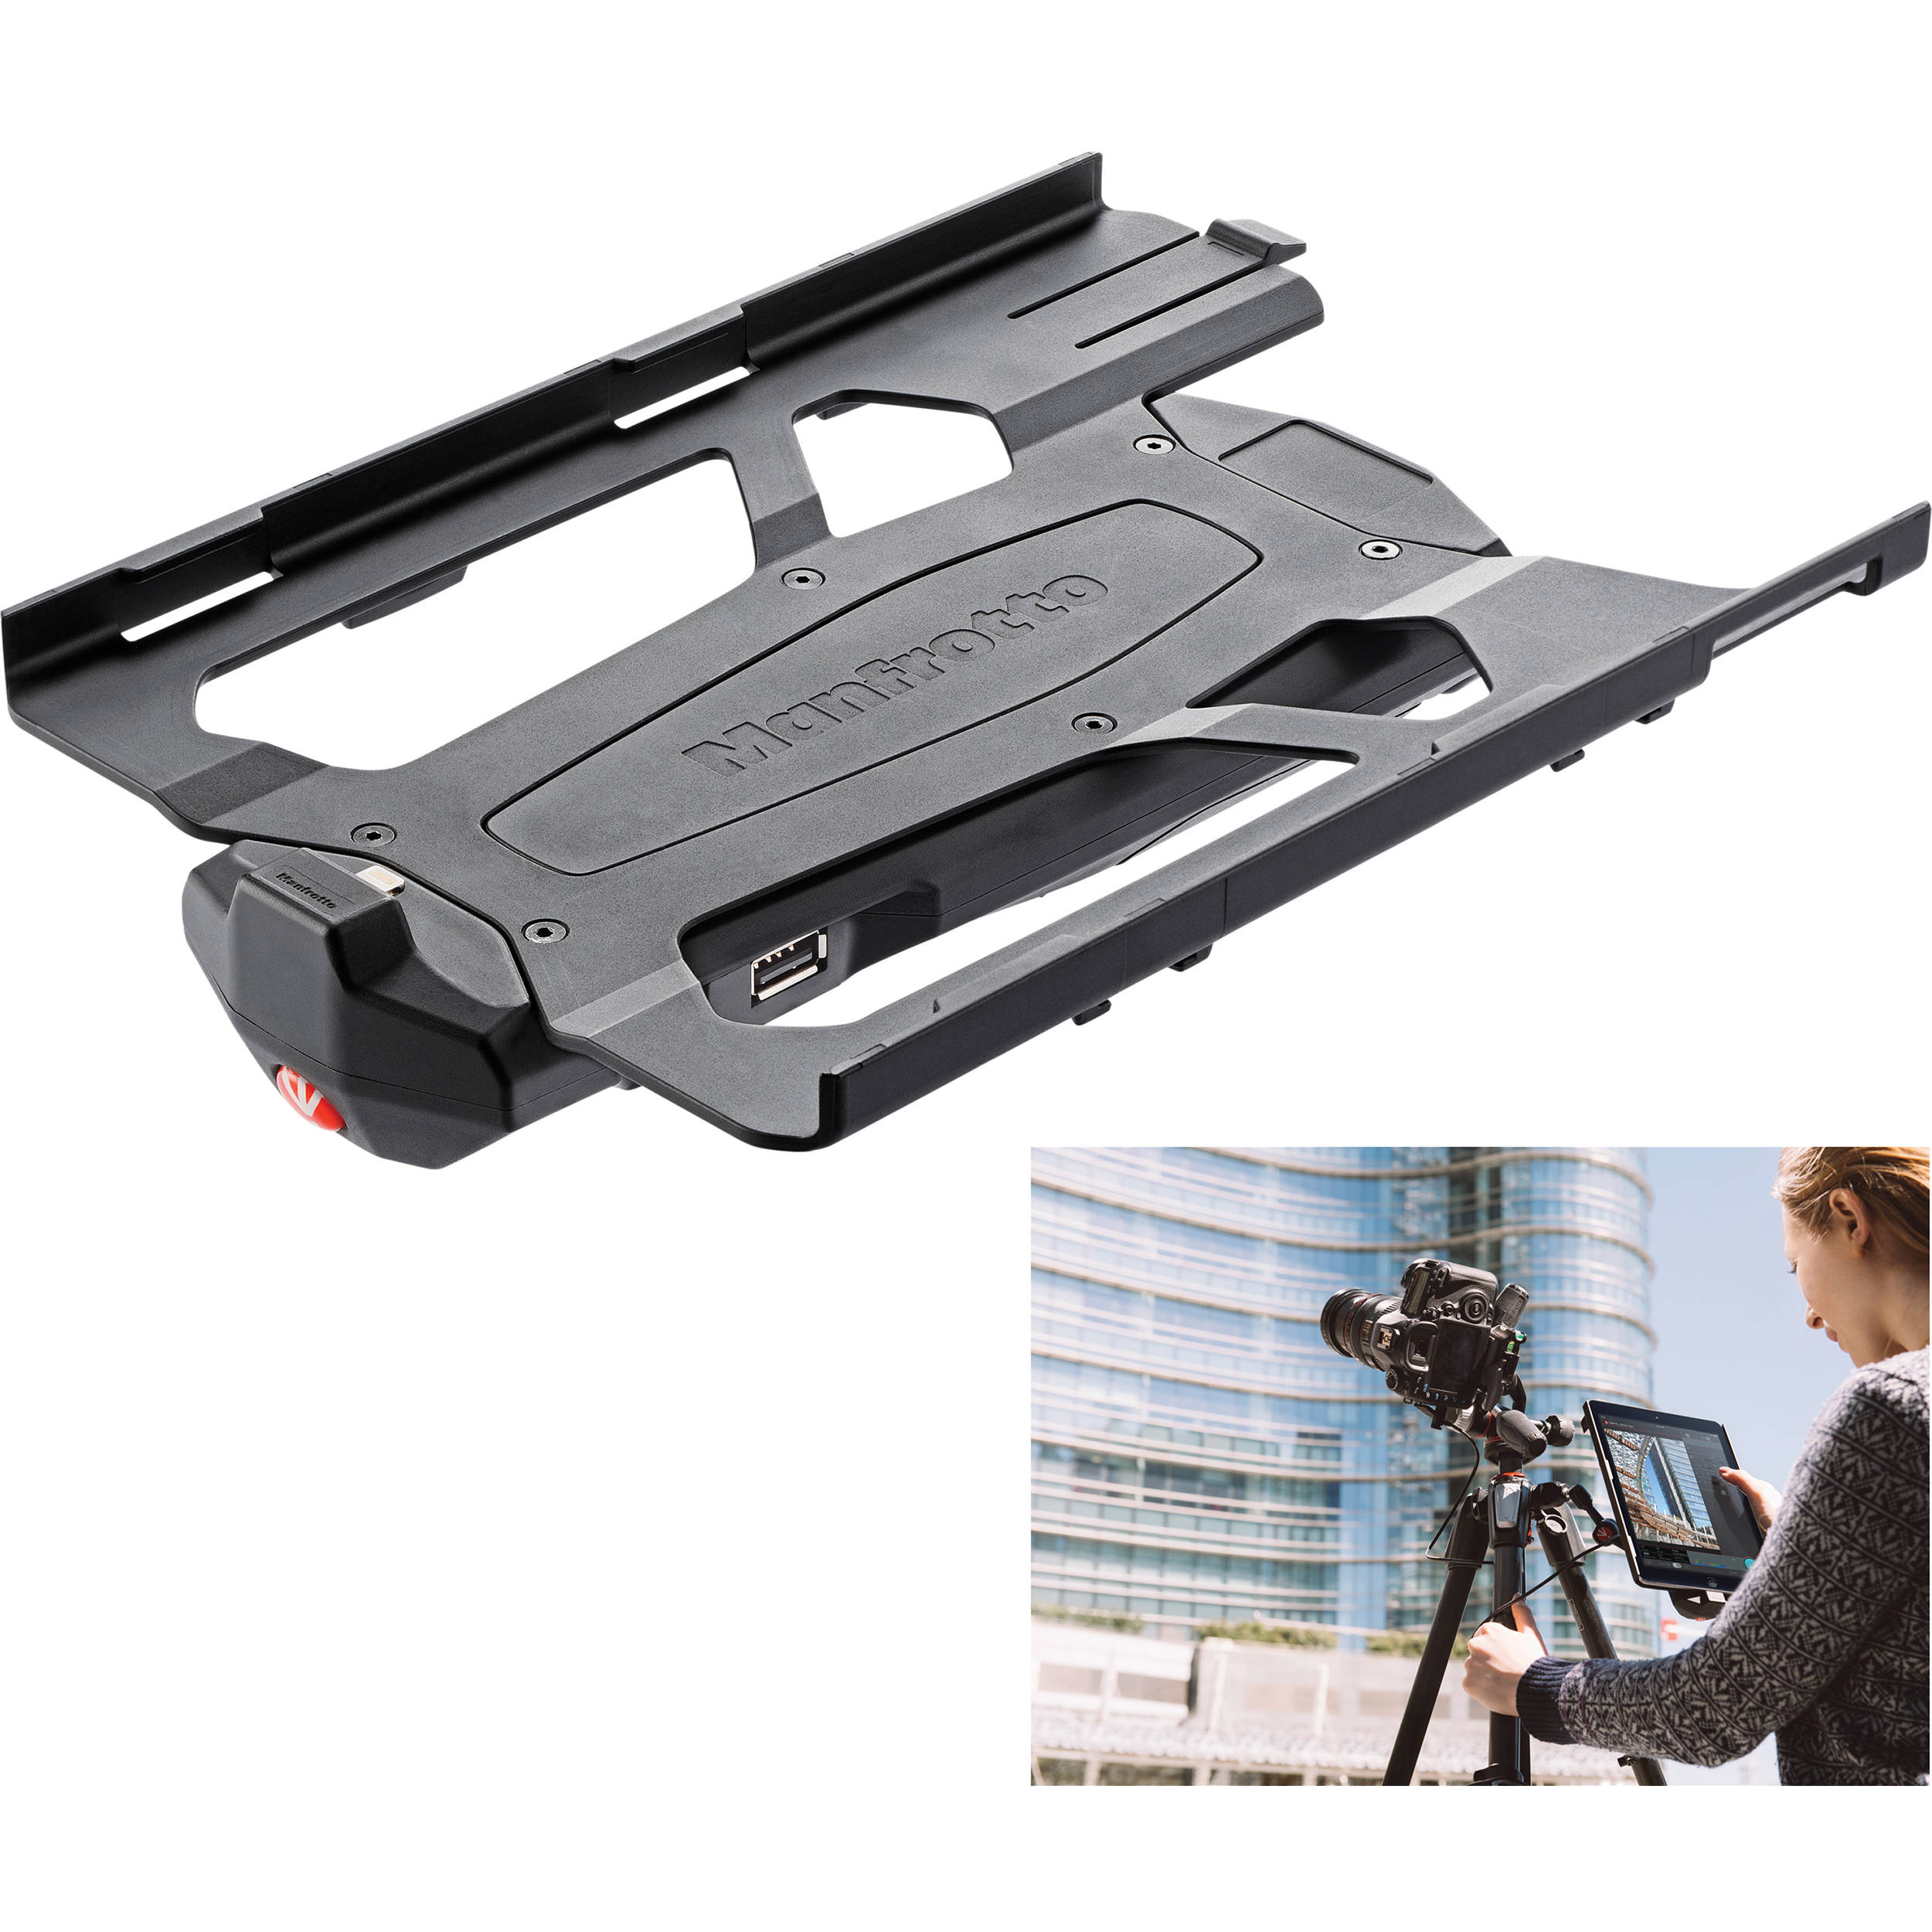 Manfrotto Digital Director for iPad Air and Nikon and Canon DSLR Cameras